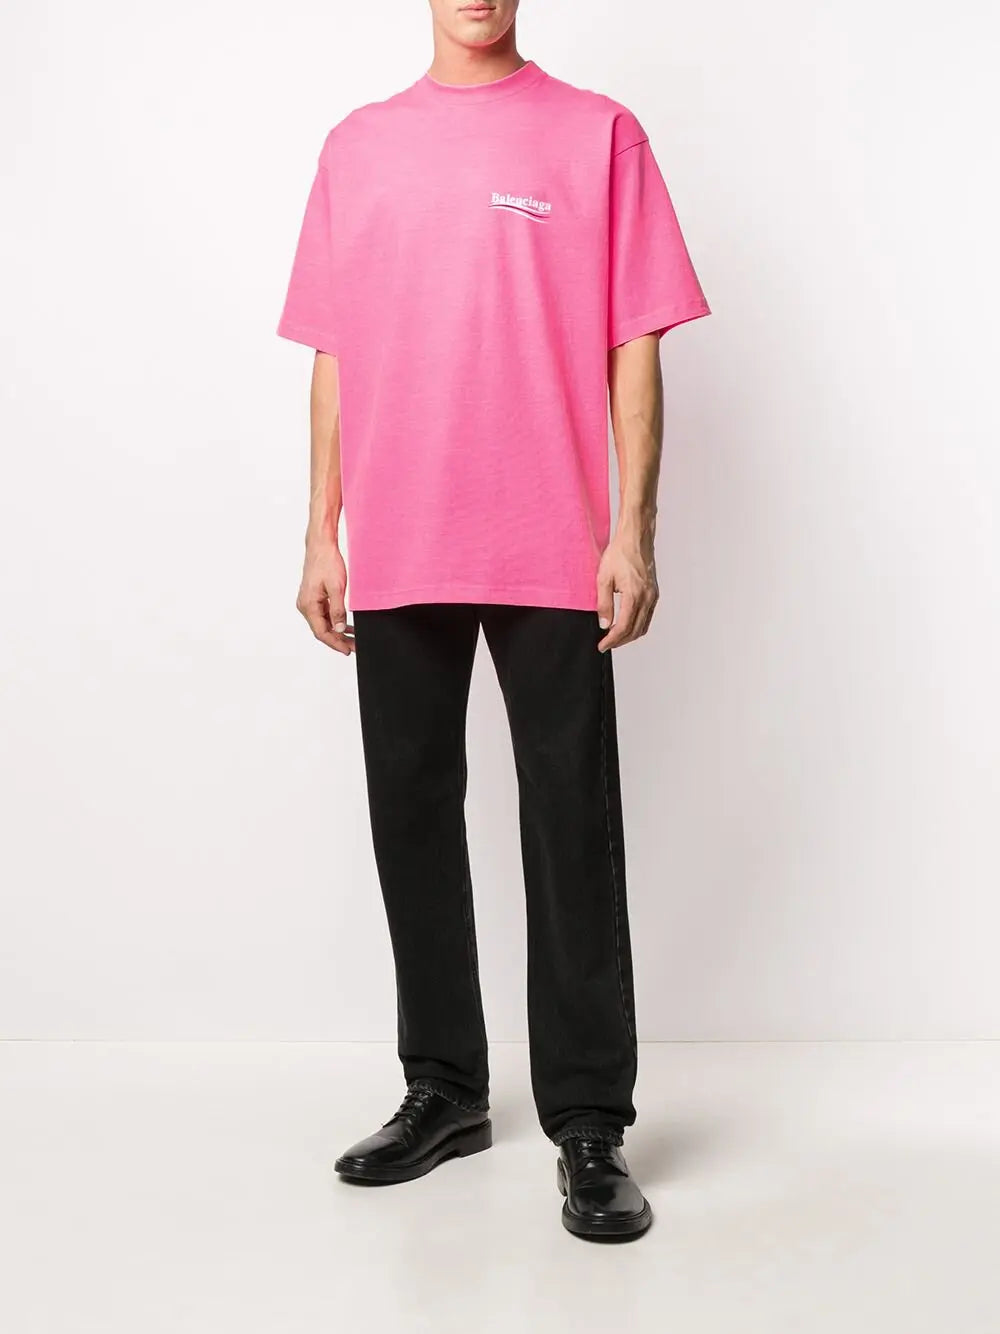 Balenciaga Political Campaign T-shirt in Vintage Jersey in Pink